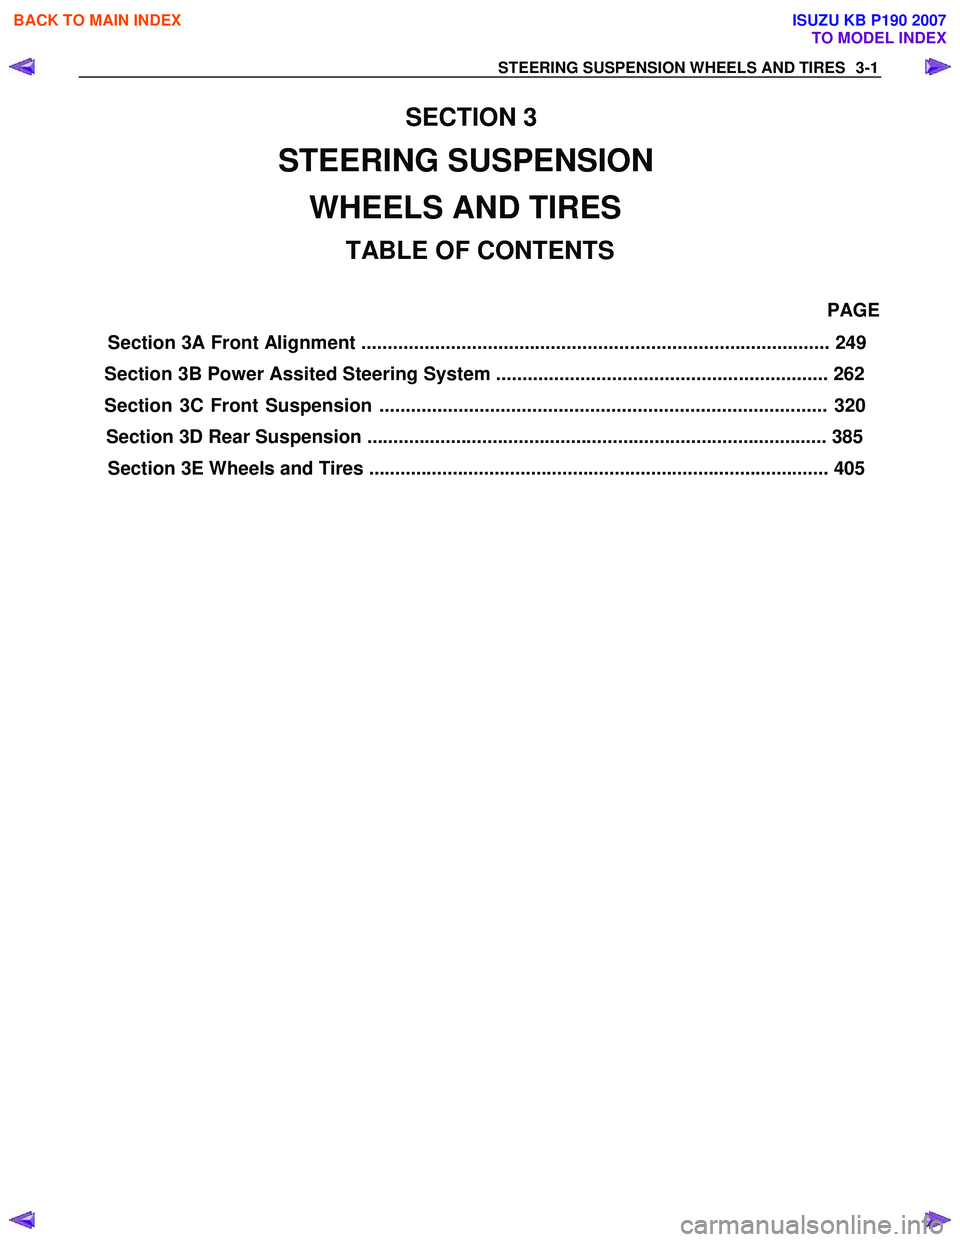 ISUZU KB P190 2007  Workshop Repair Manual STEERING SUSPENSION WHEELS AND TIRES 3-1  
SECTI ON 3  
STEERING SUSPENSION
TA BLE OF CONTENTS 
Section 3A  Front A lignment  ................................................... ......................